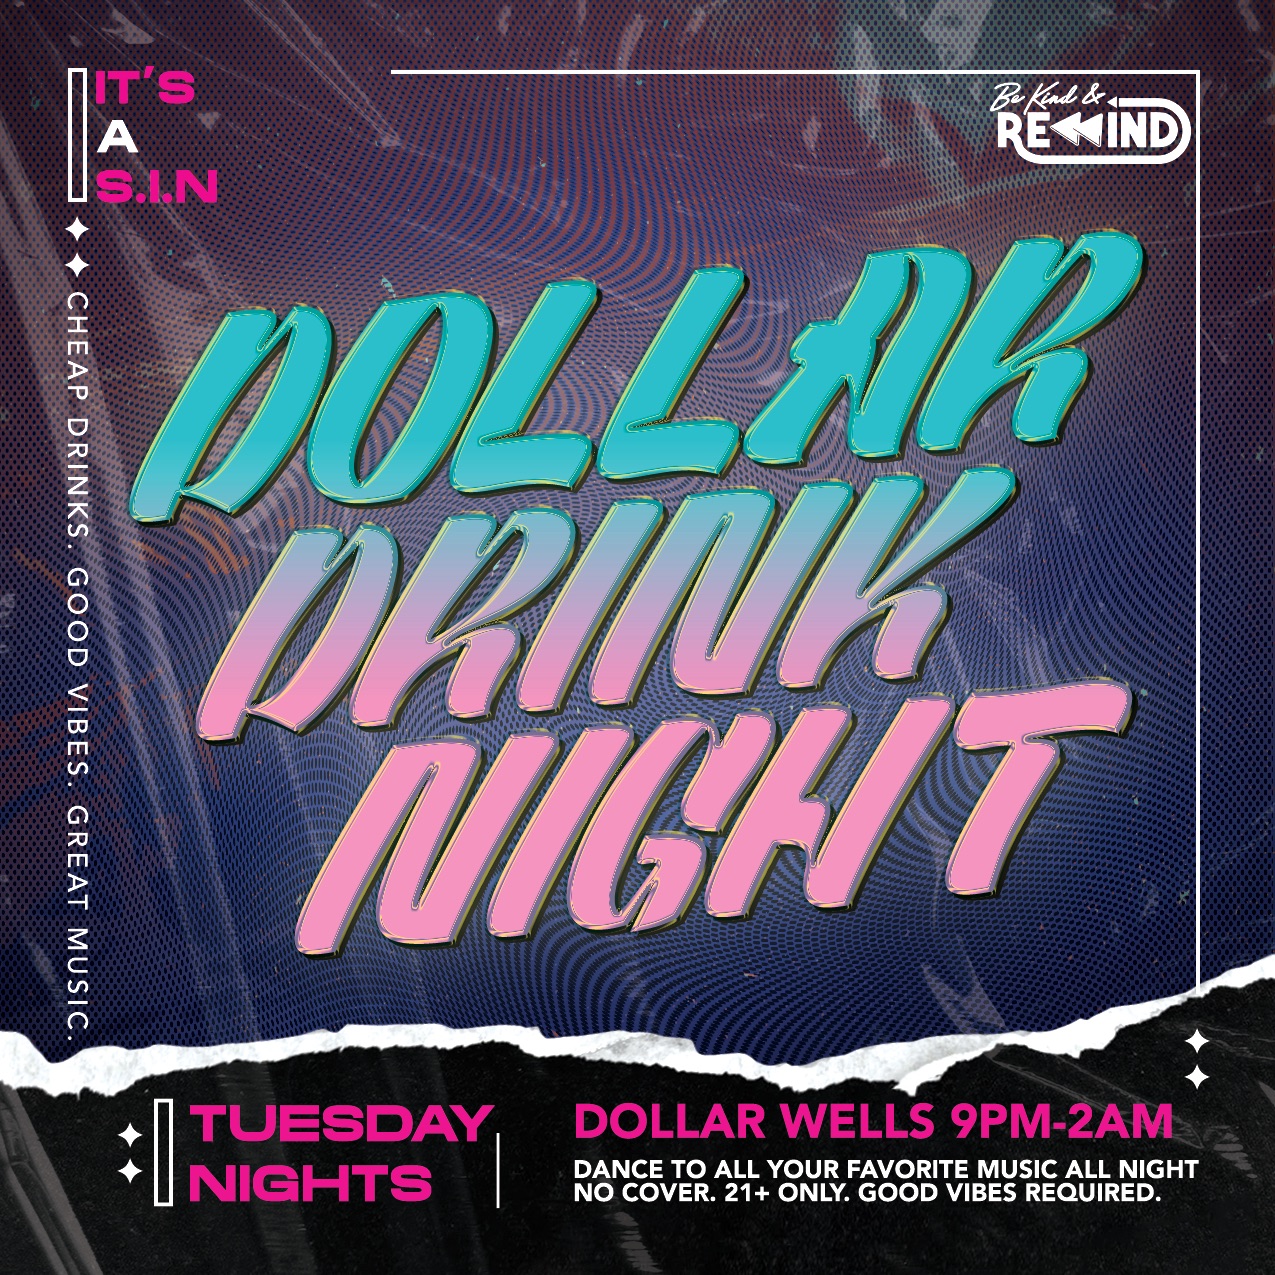 dollar drink tuesday at be kind and rewind